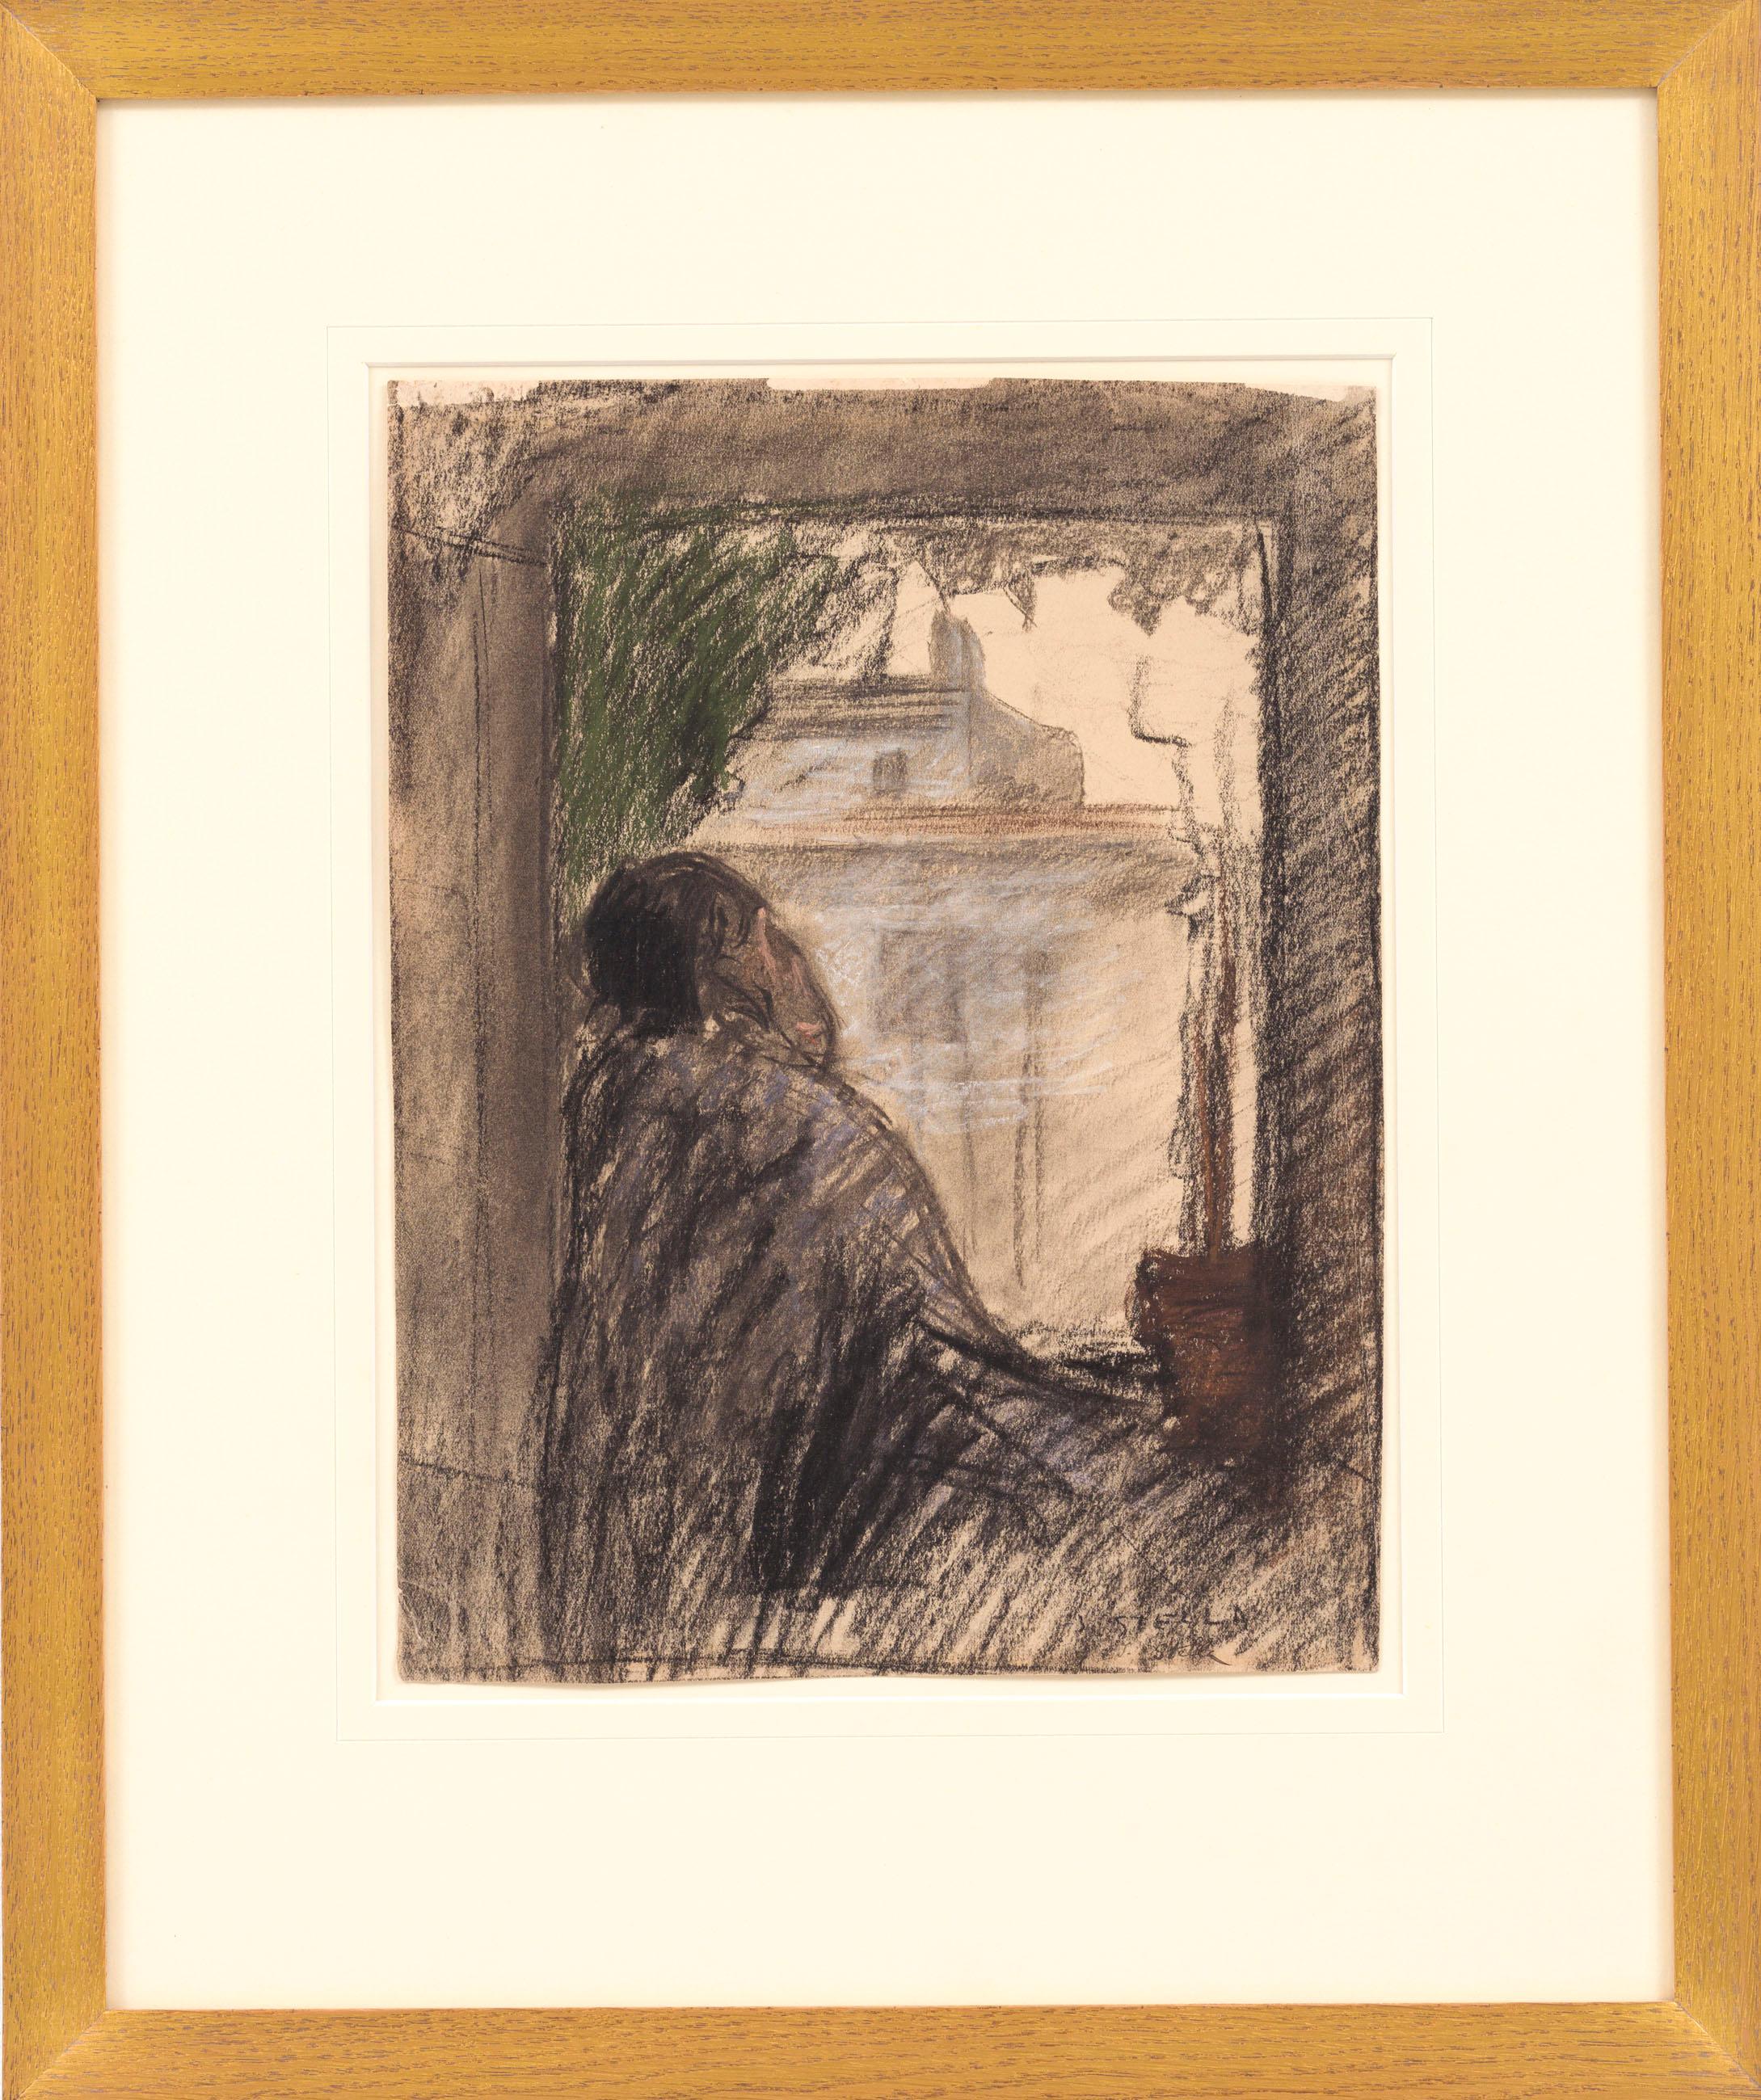 Joseph Stella
Man seated at a window, 
1930
charcoal and pastels on paper
38 x 29 cm
Signed bottom right

Provenance:
Collection Zabriskie Gallery, New York